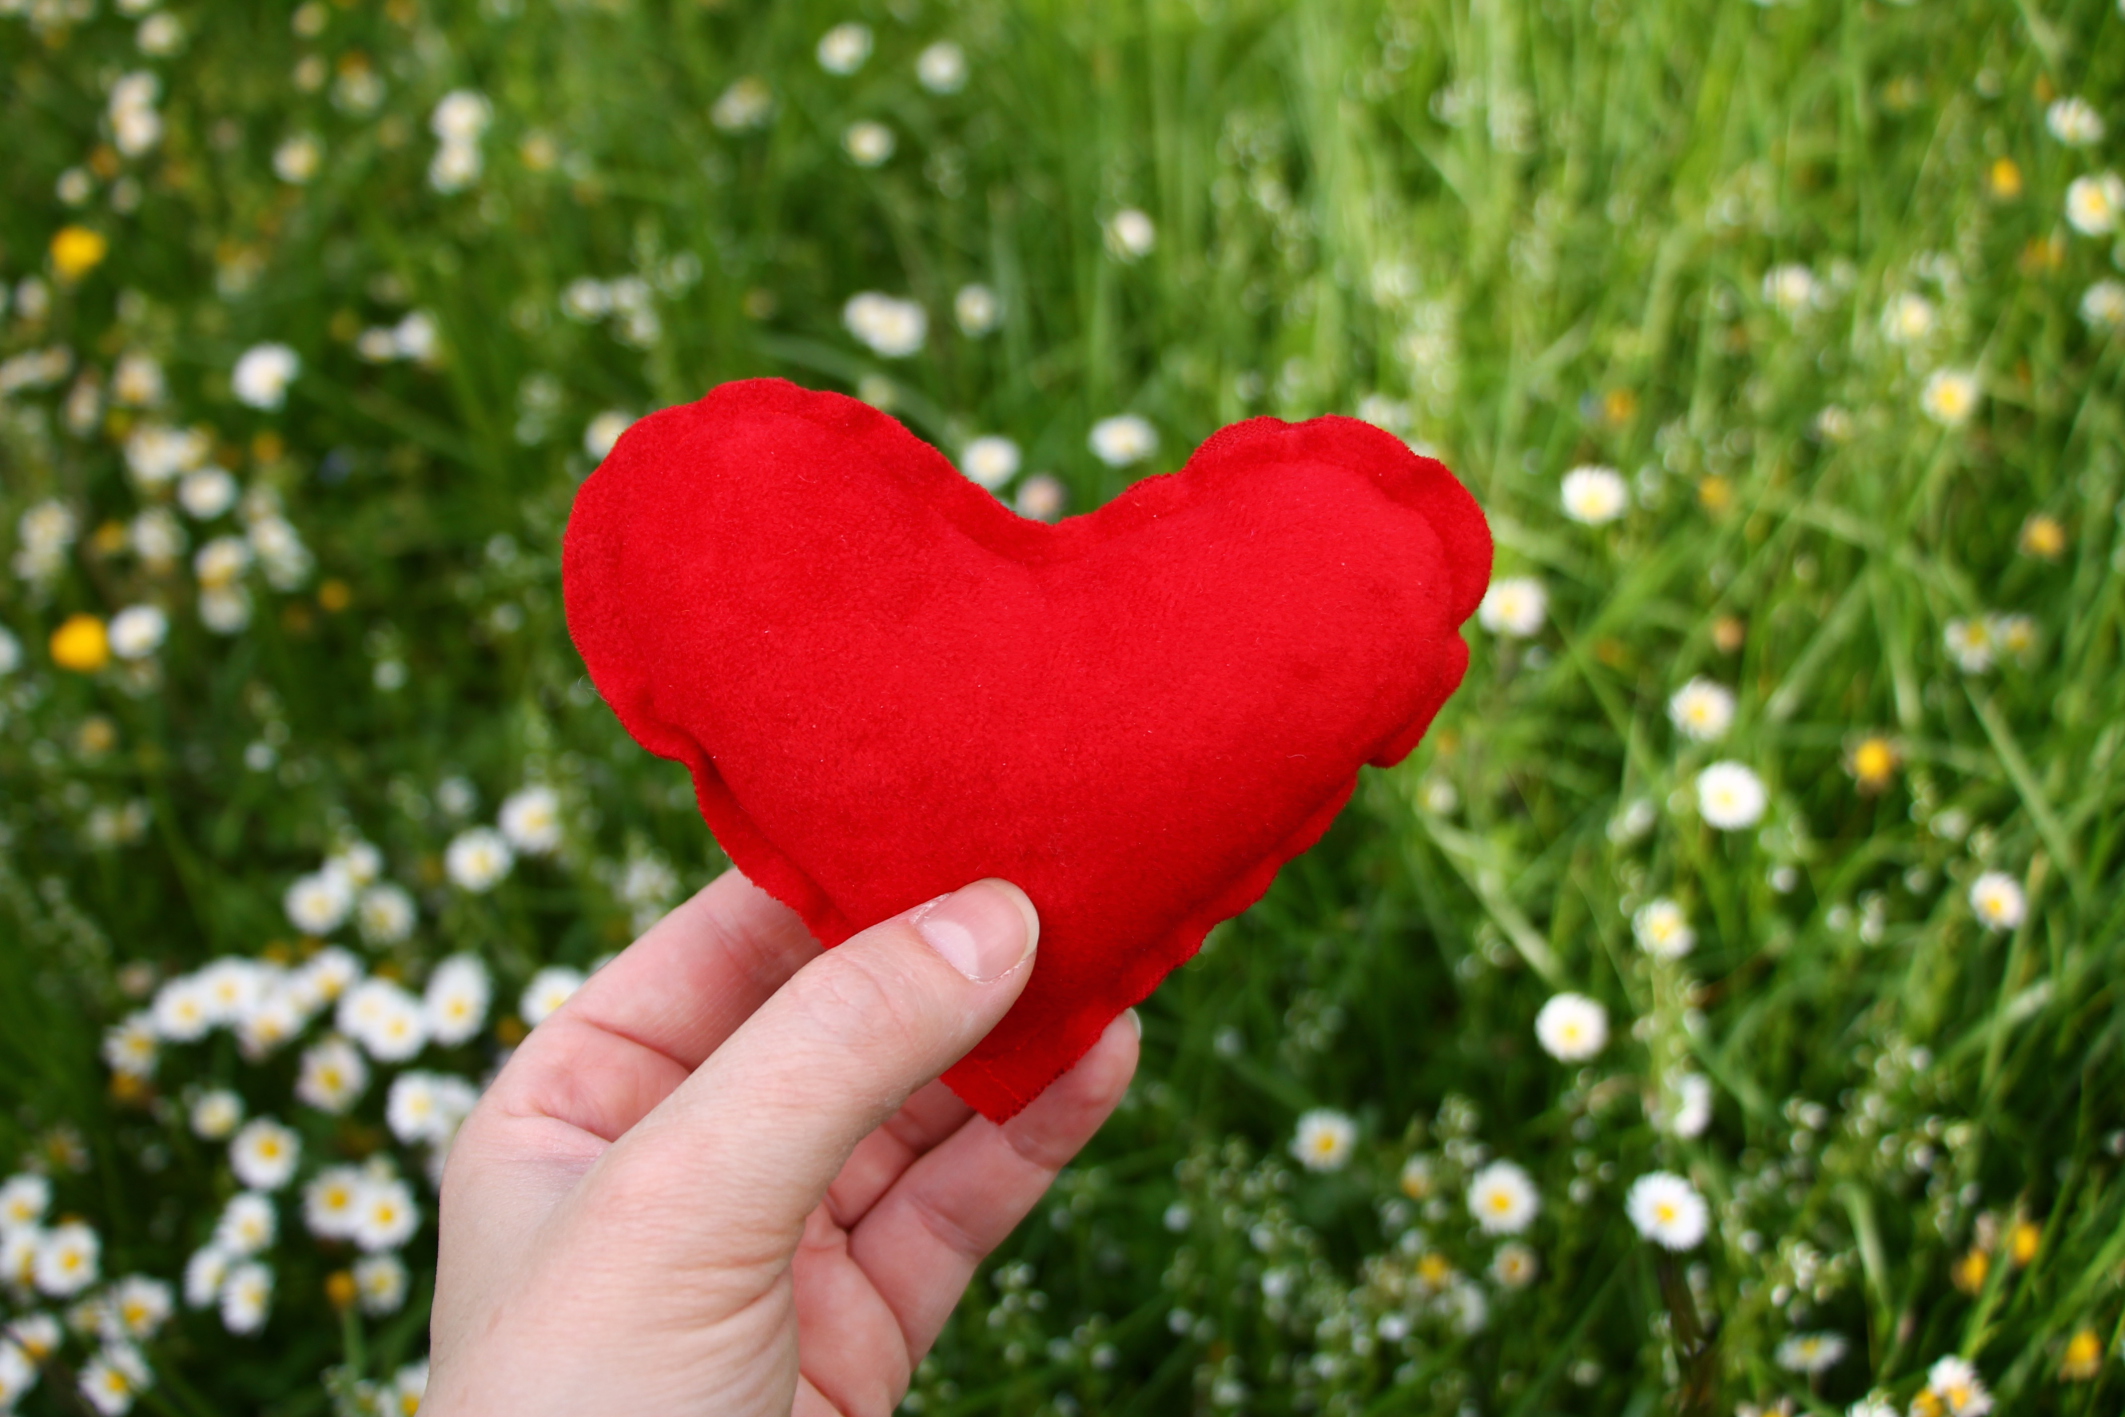 Red heart in woman's hand with grass in background